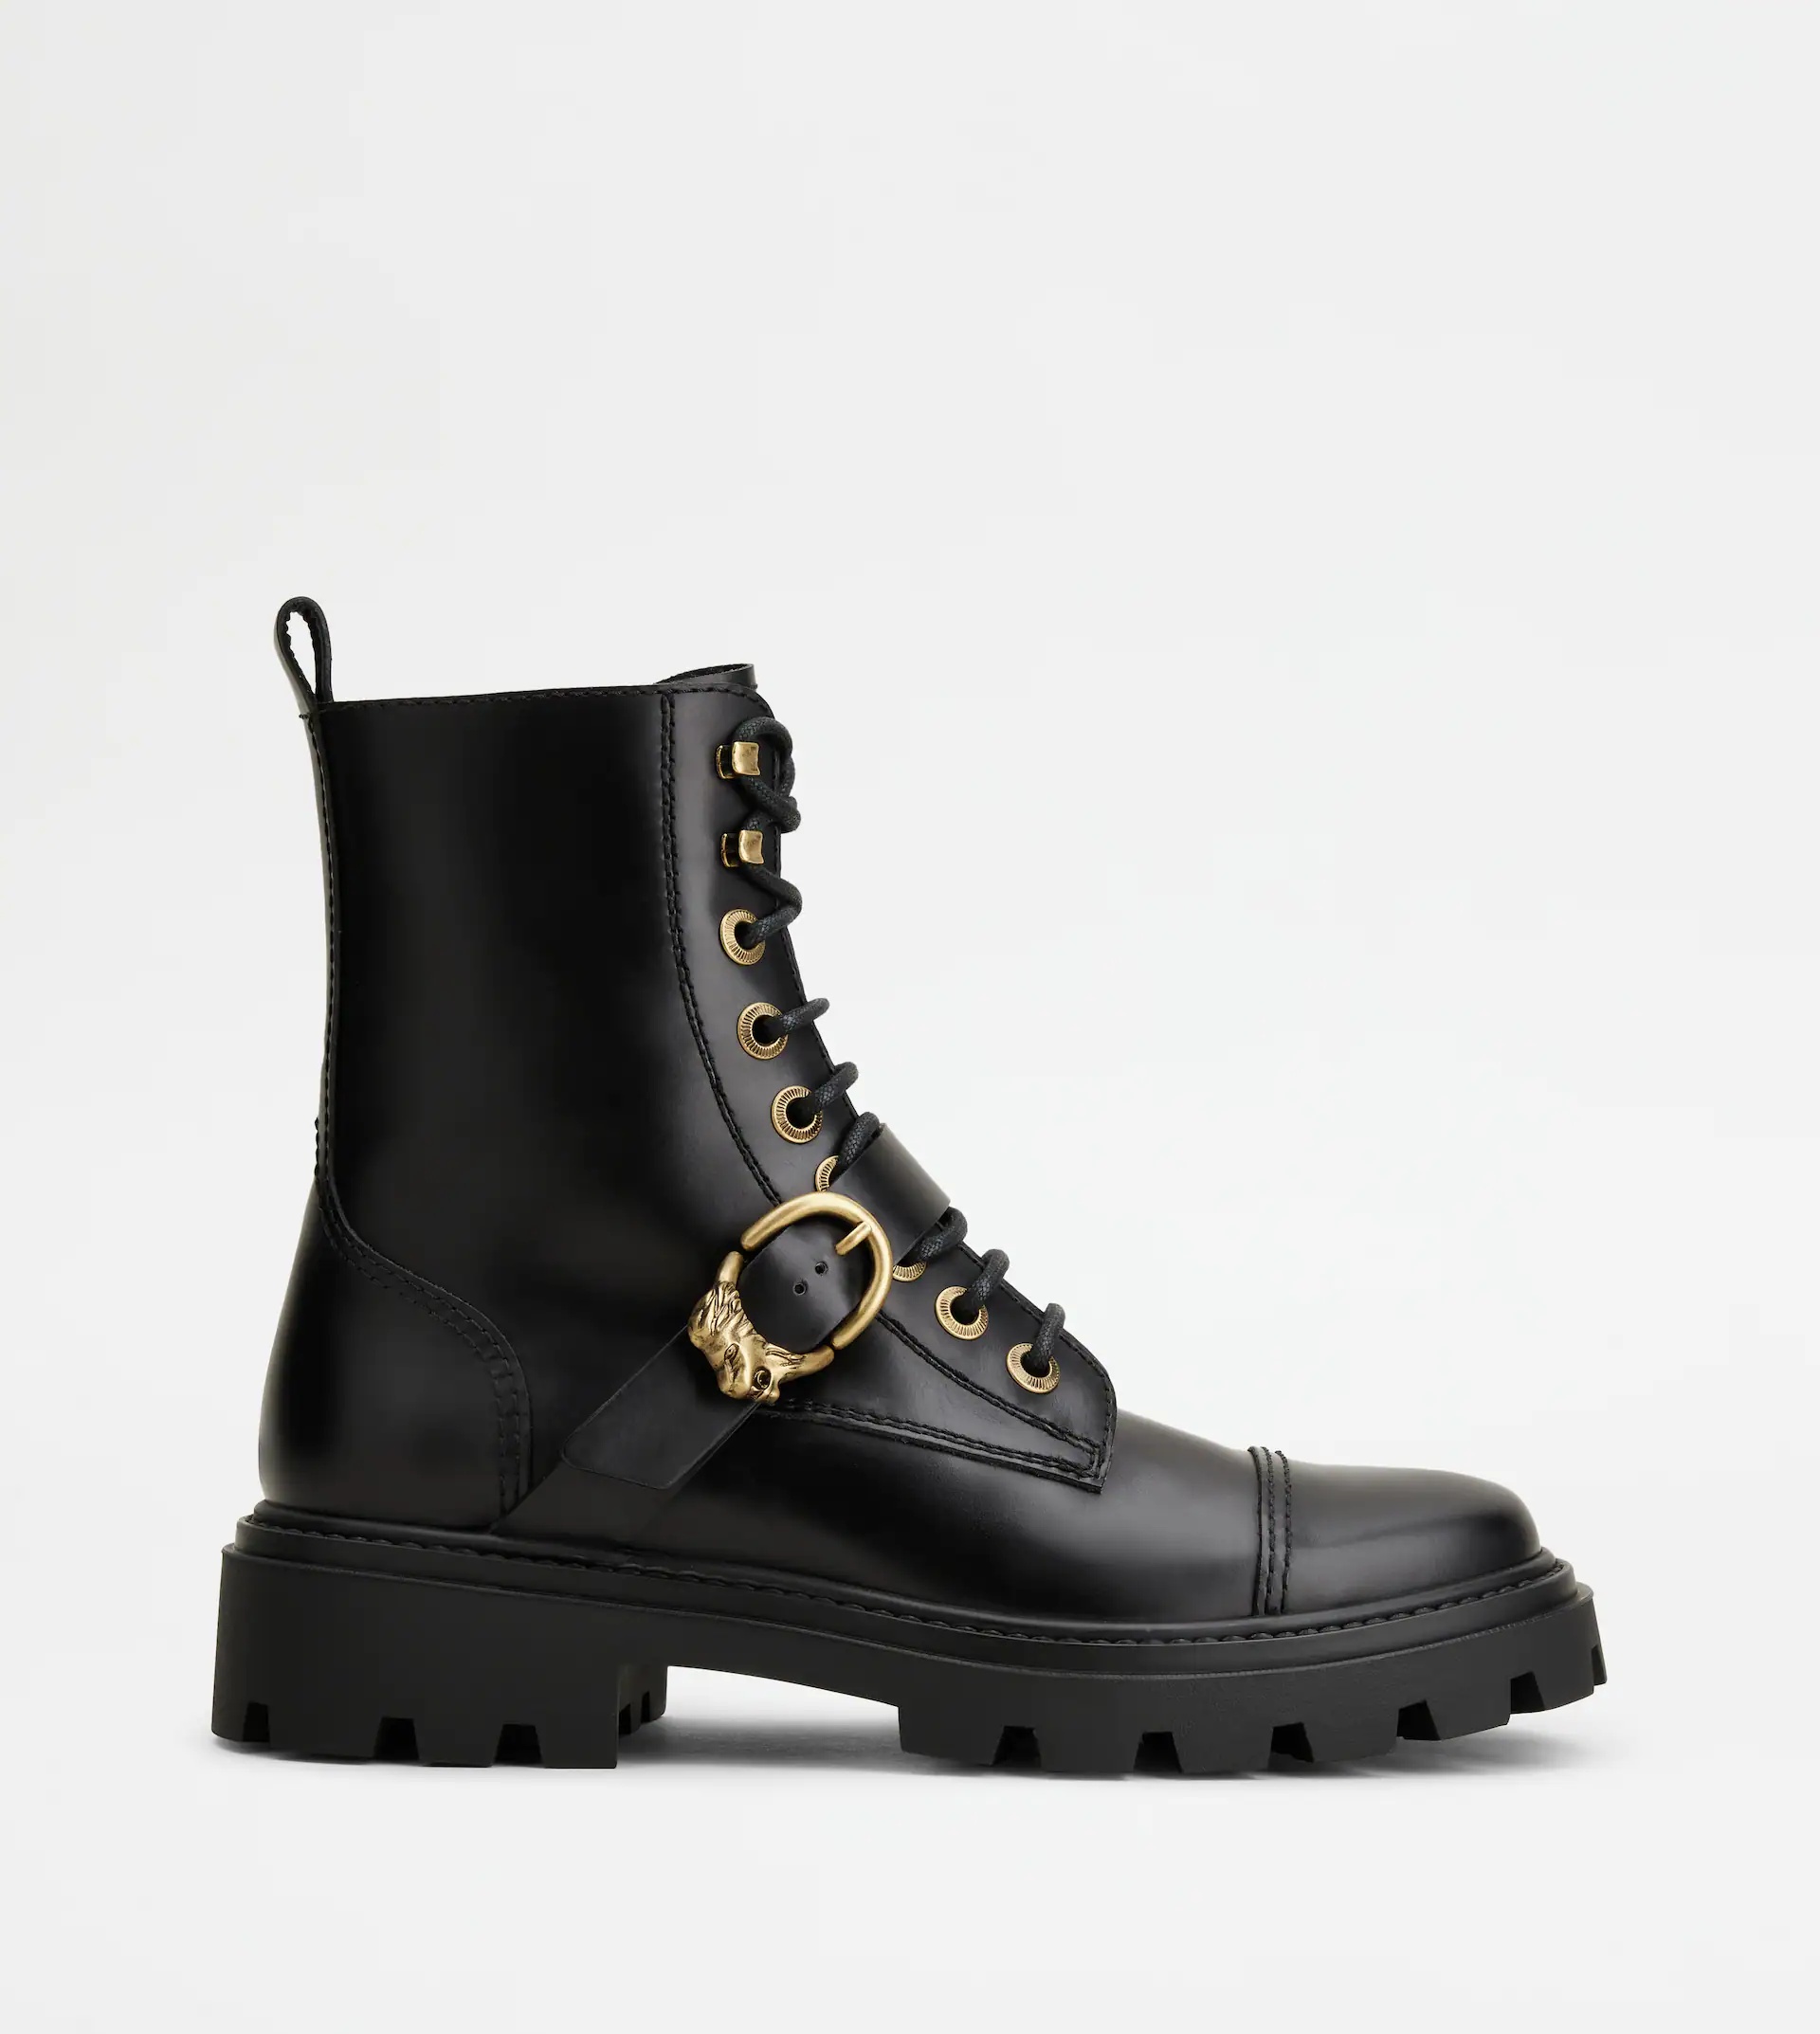 TOD'S COMBAT BOOTS IN LEATHER - BLACK - 1